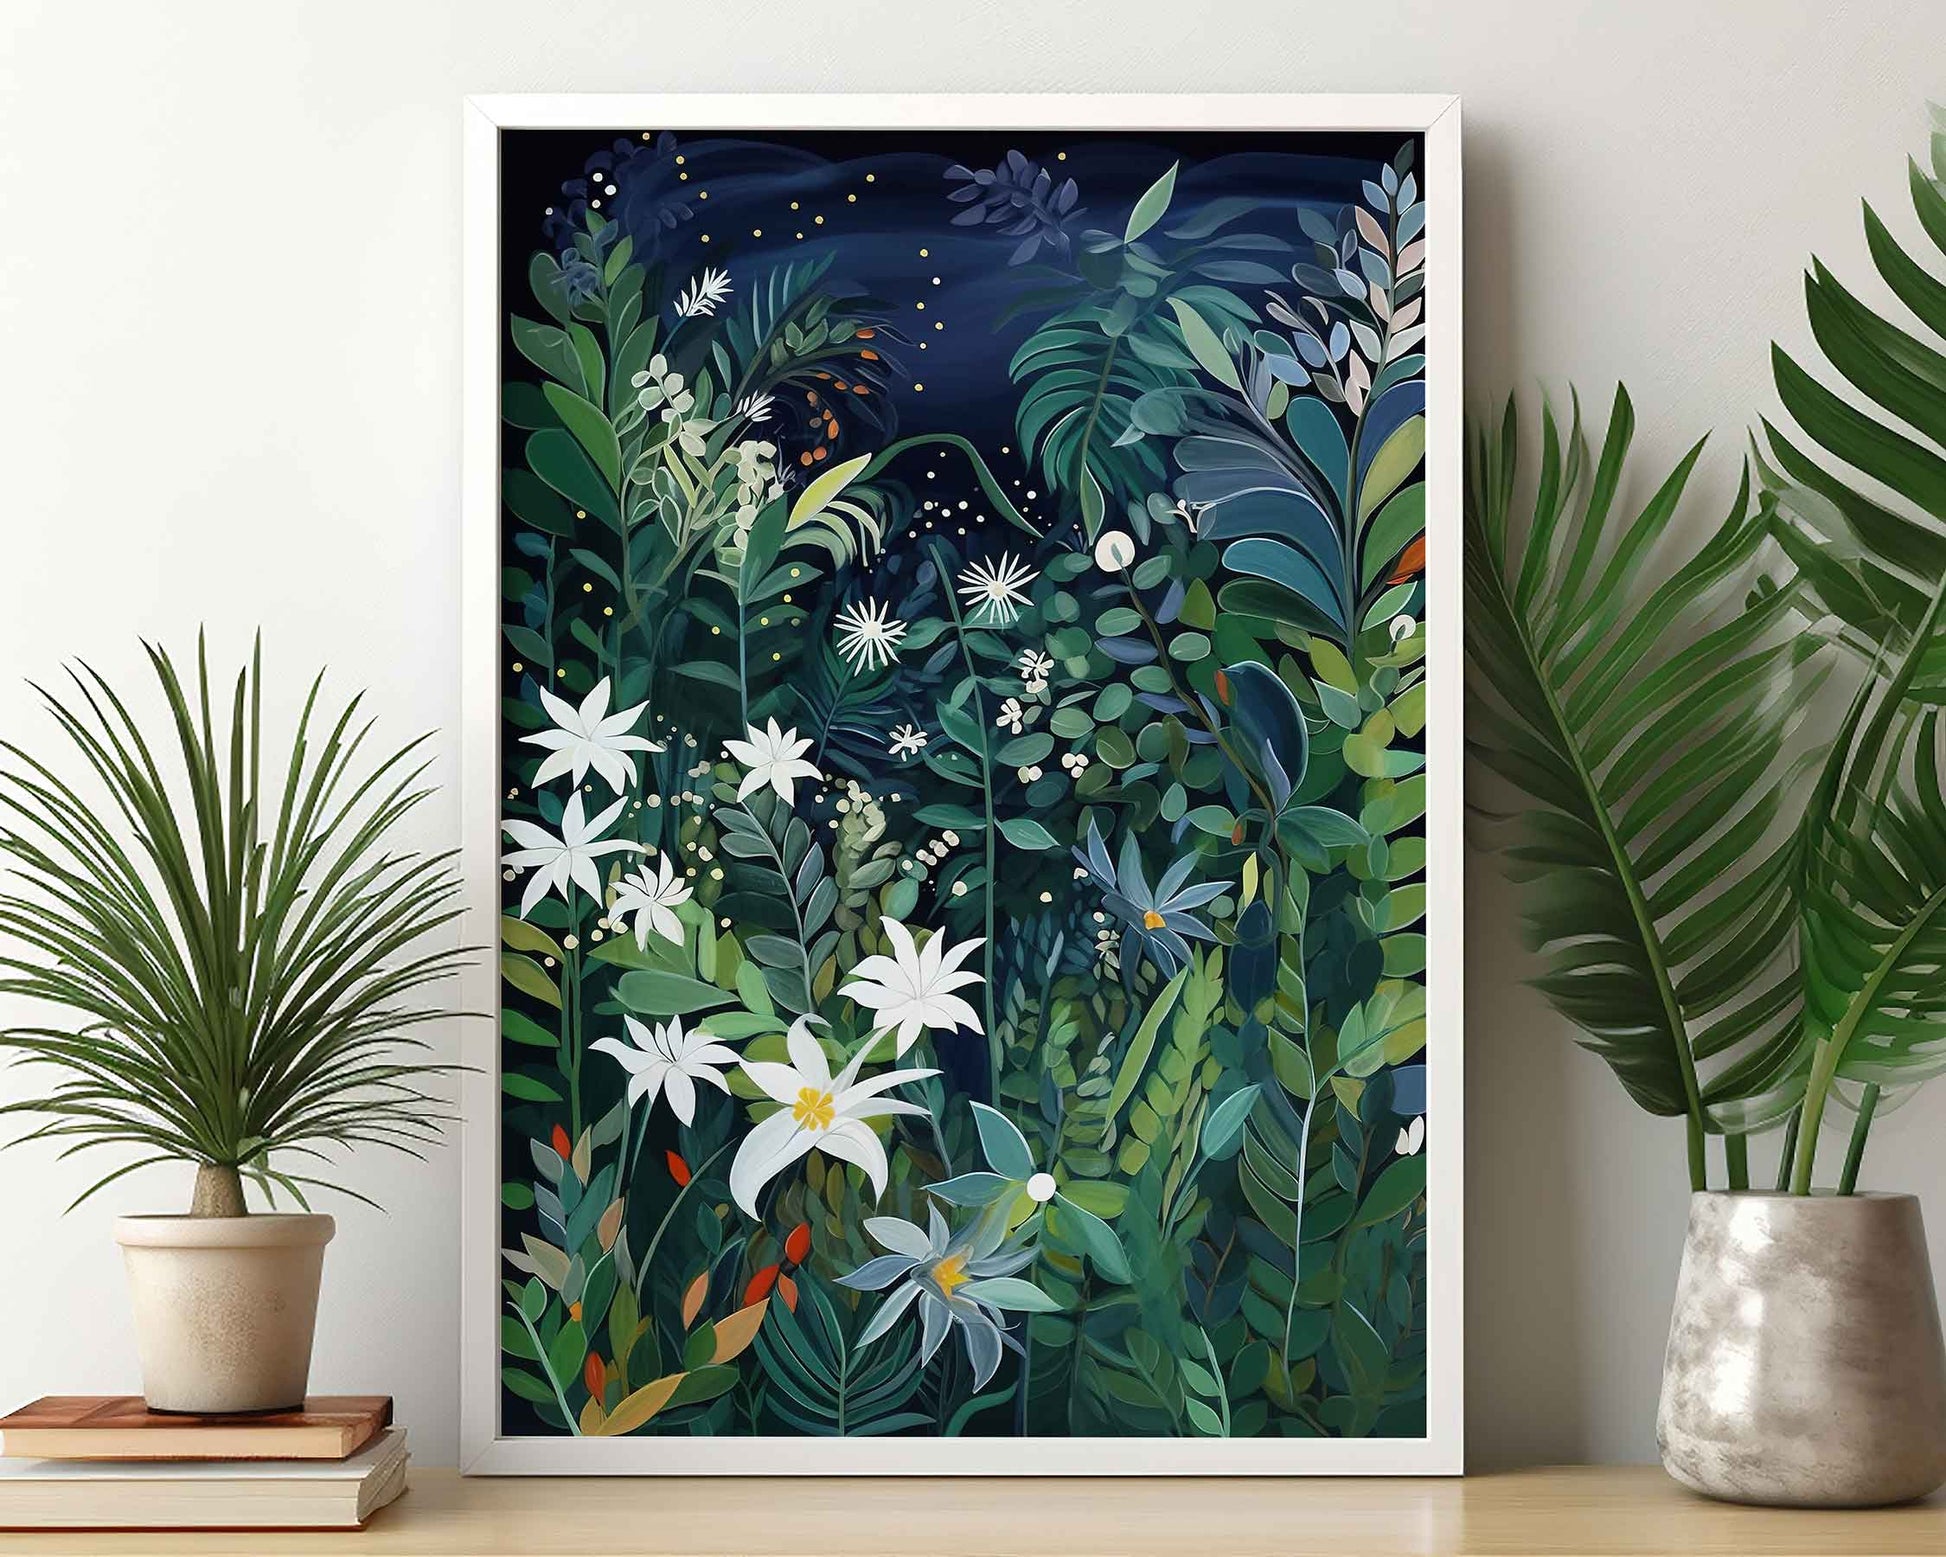 Framed Image of Wall Art Poster Print Night Tropical Flowers and Leaves Naive Style